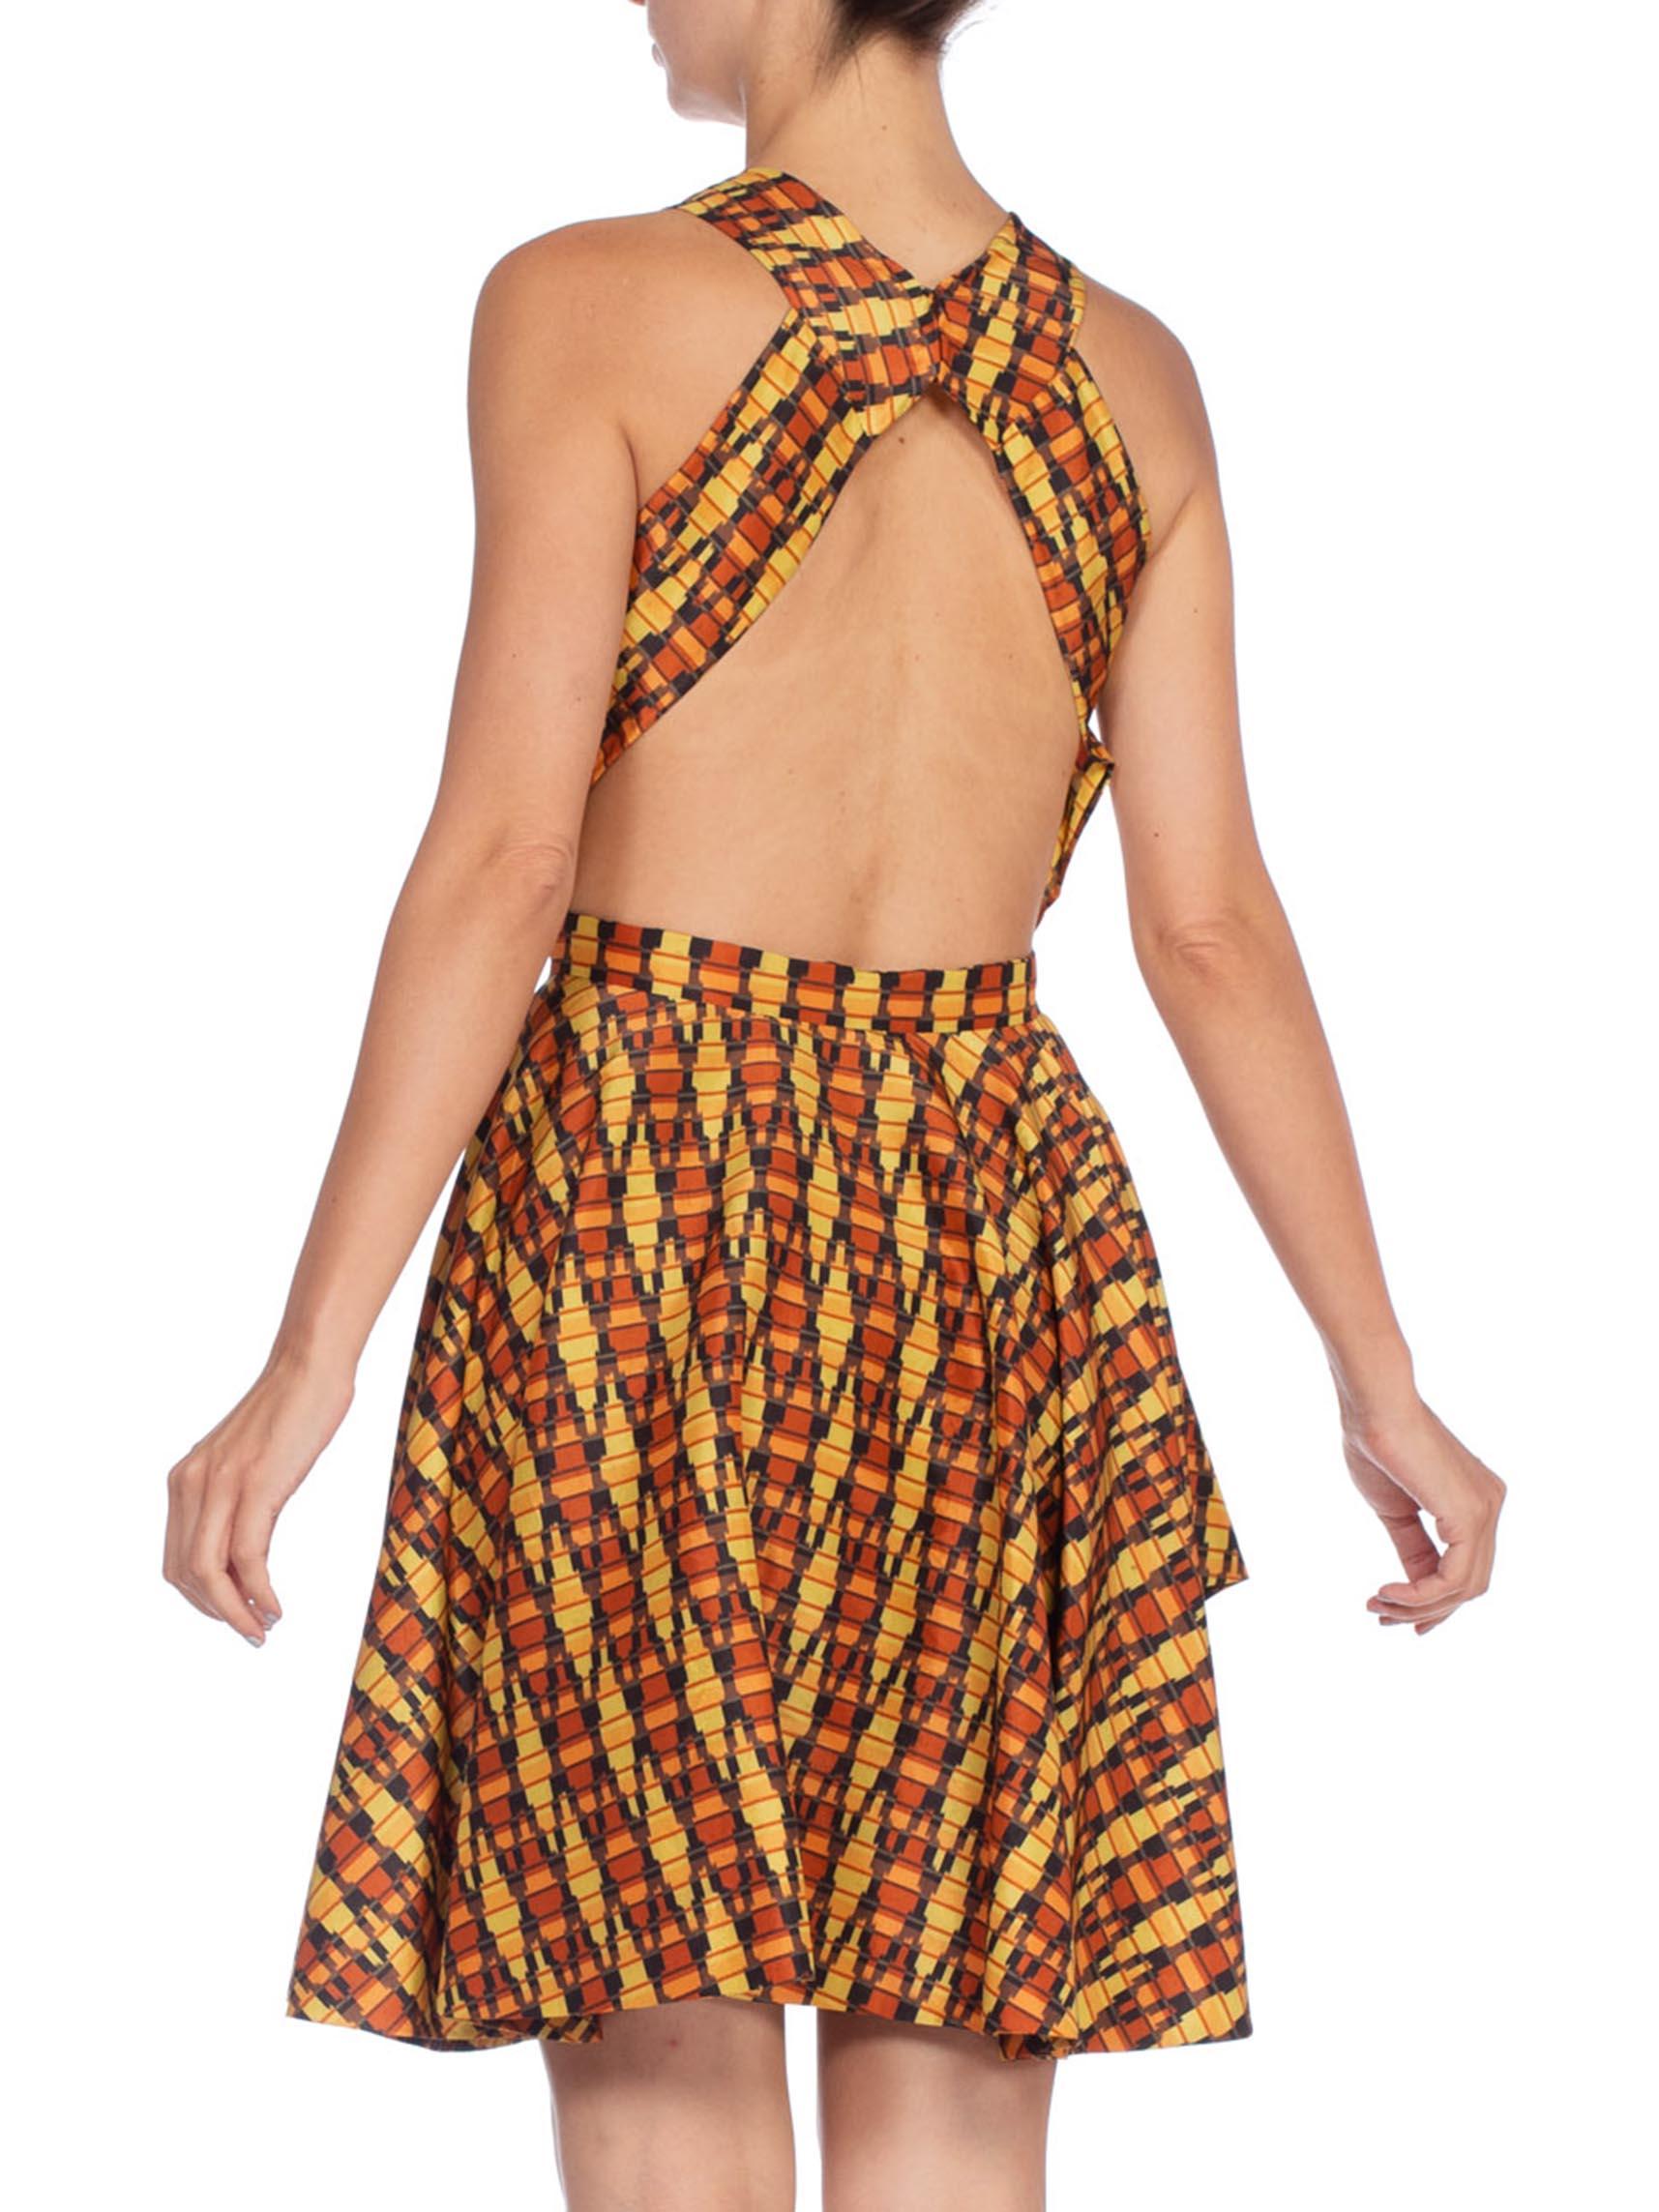 MORPHEW COLLECTION Hand Woven Silk Ikat Dress With Peek-A-Boo Front & Slit 4